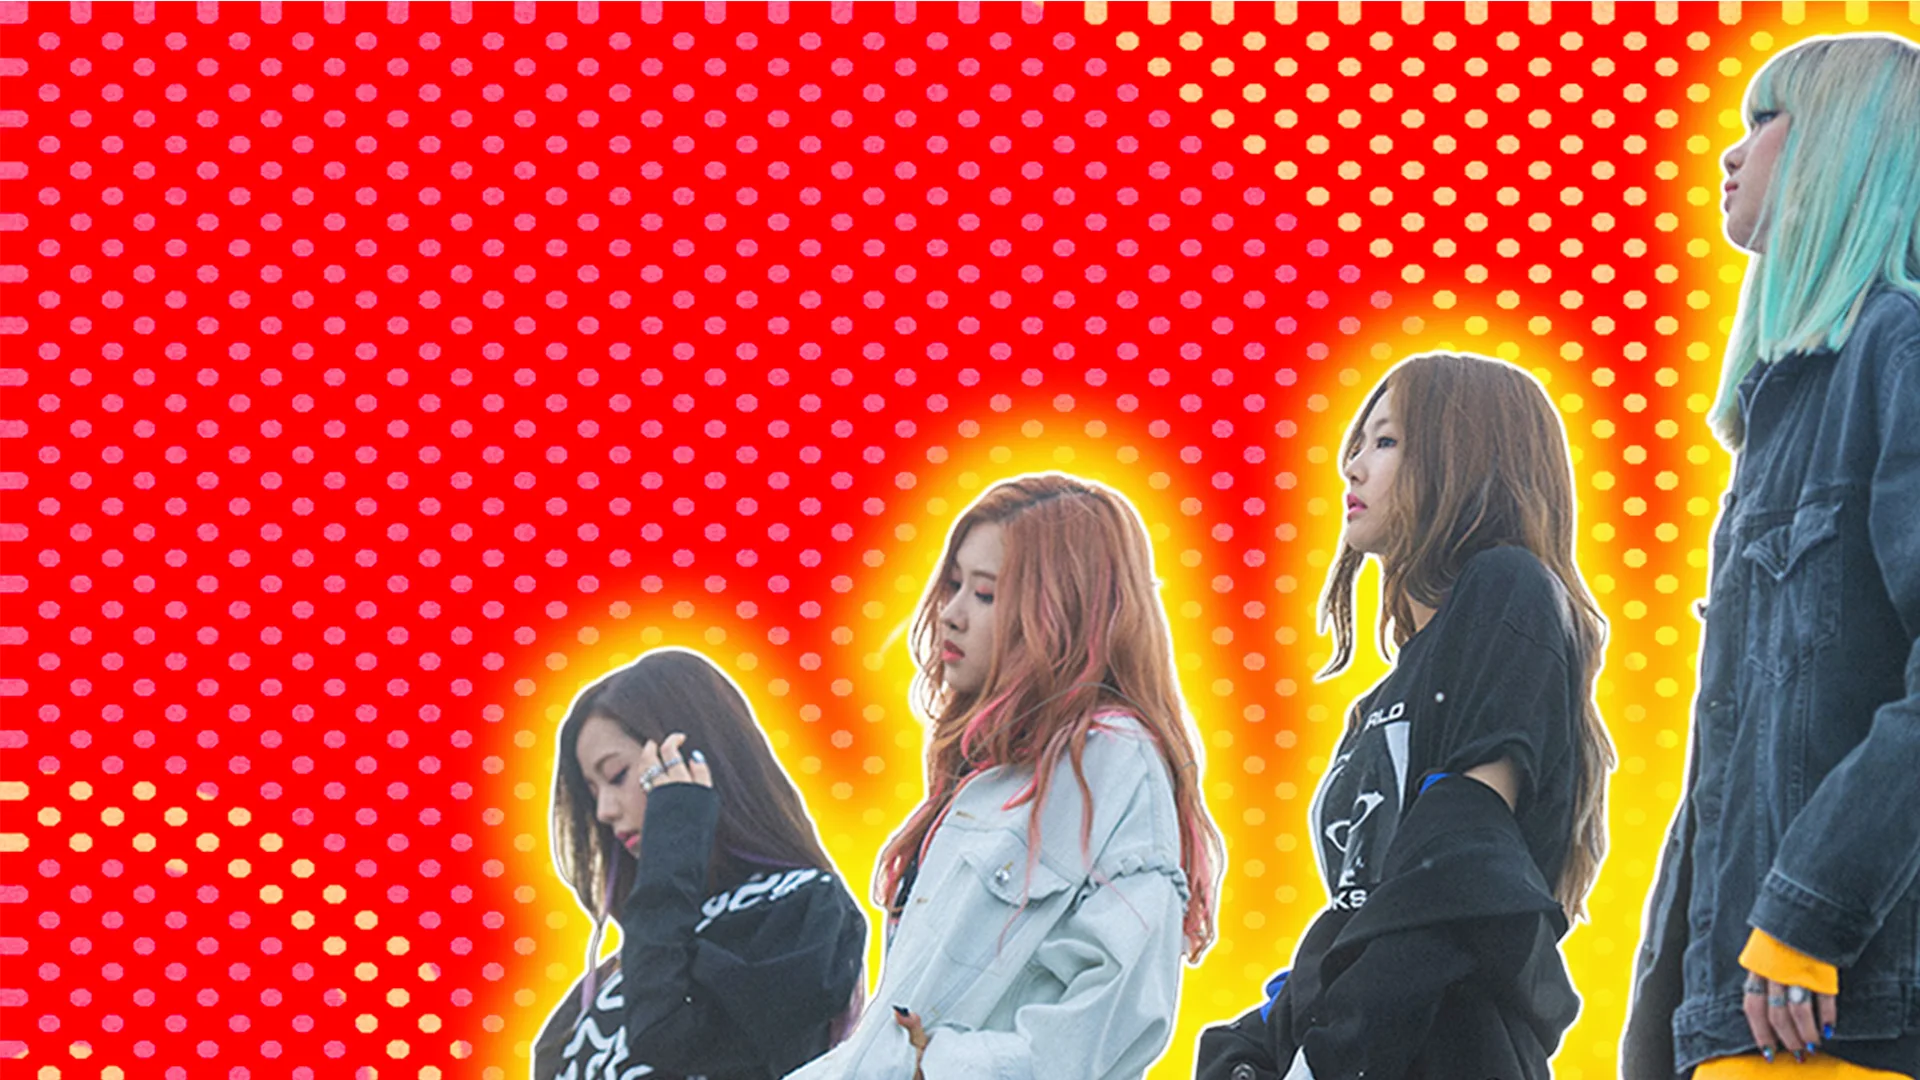 Blackpink - in graphic house style